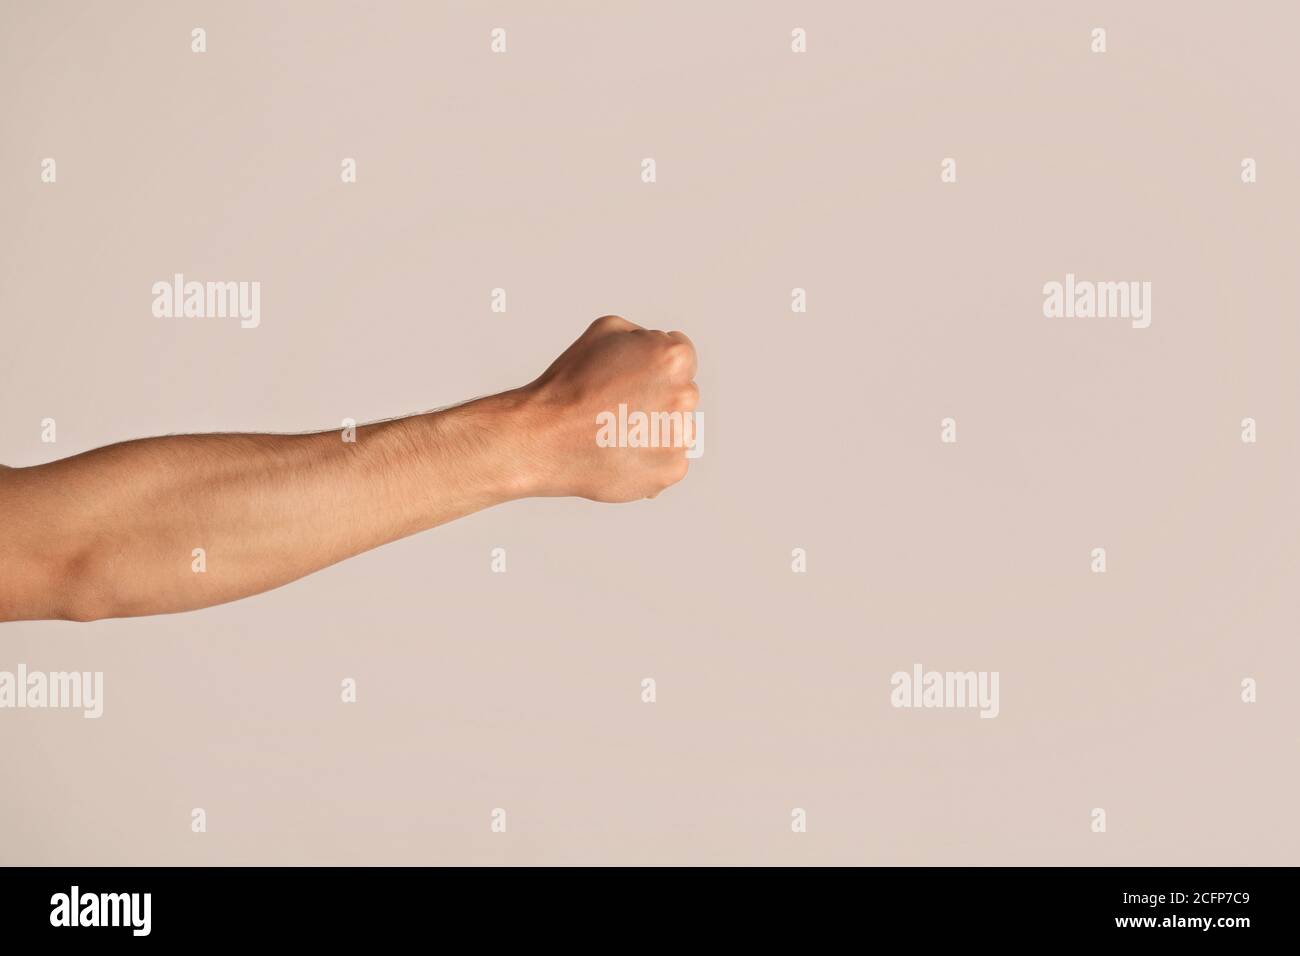 Cropped view of young man showing clenched fist on light background Stock Photo